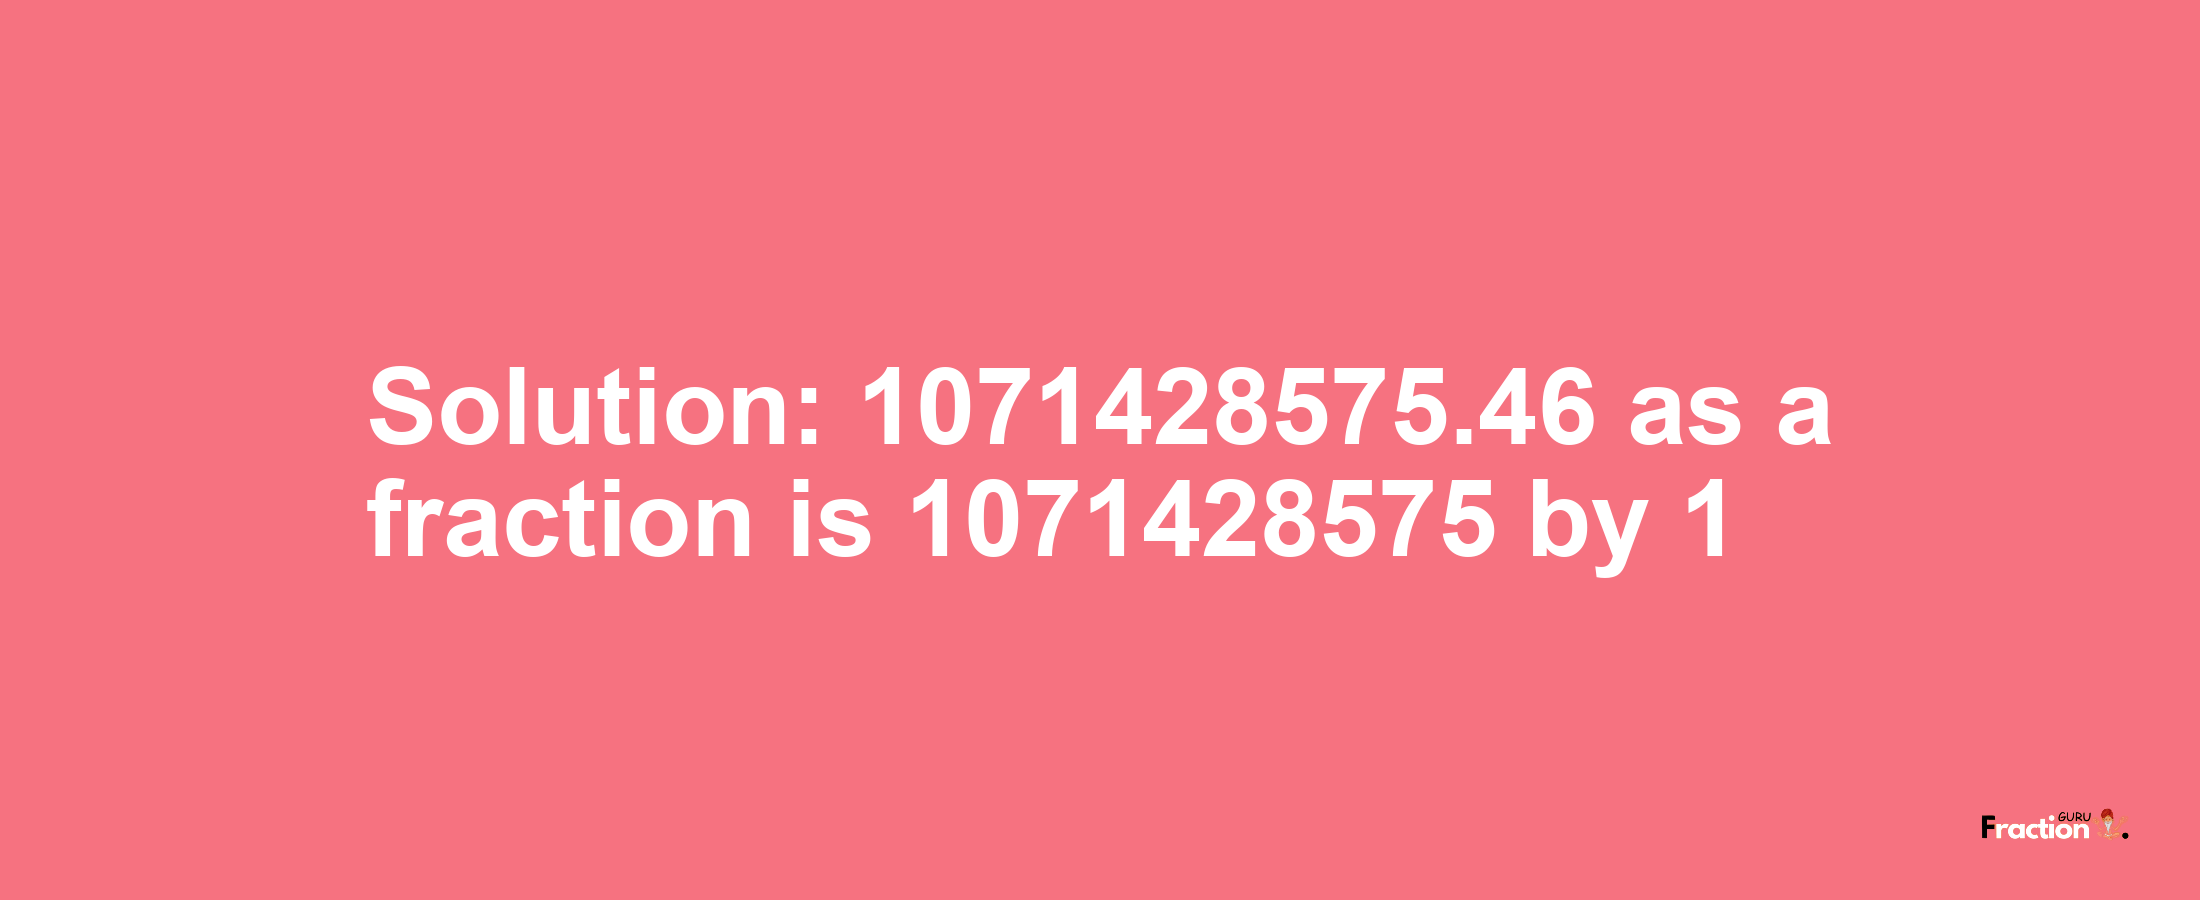 Solution:1071428575.46 as a fraction is 1071428575/1